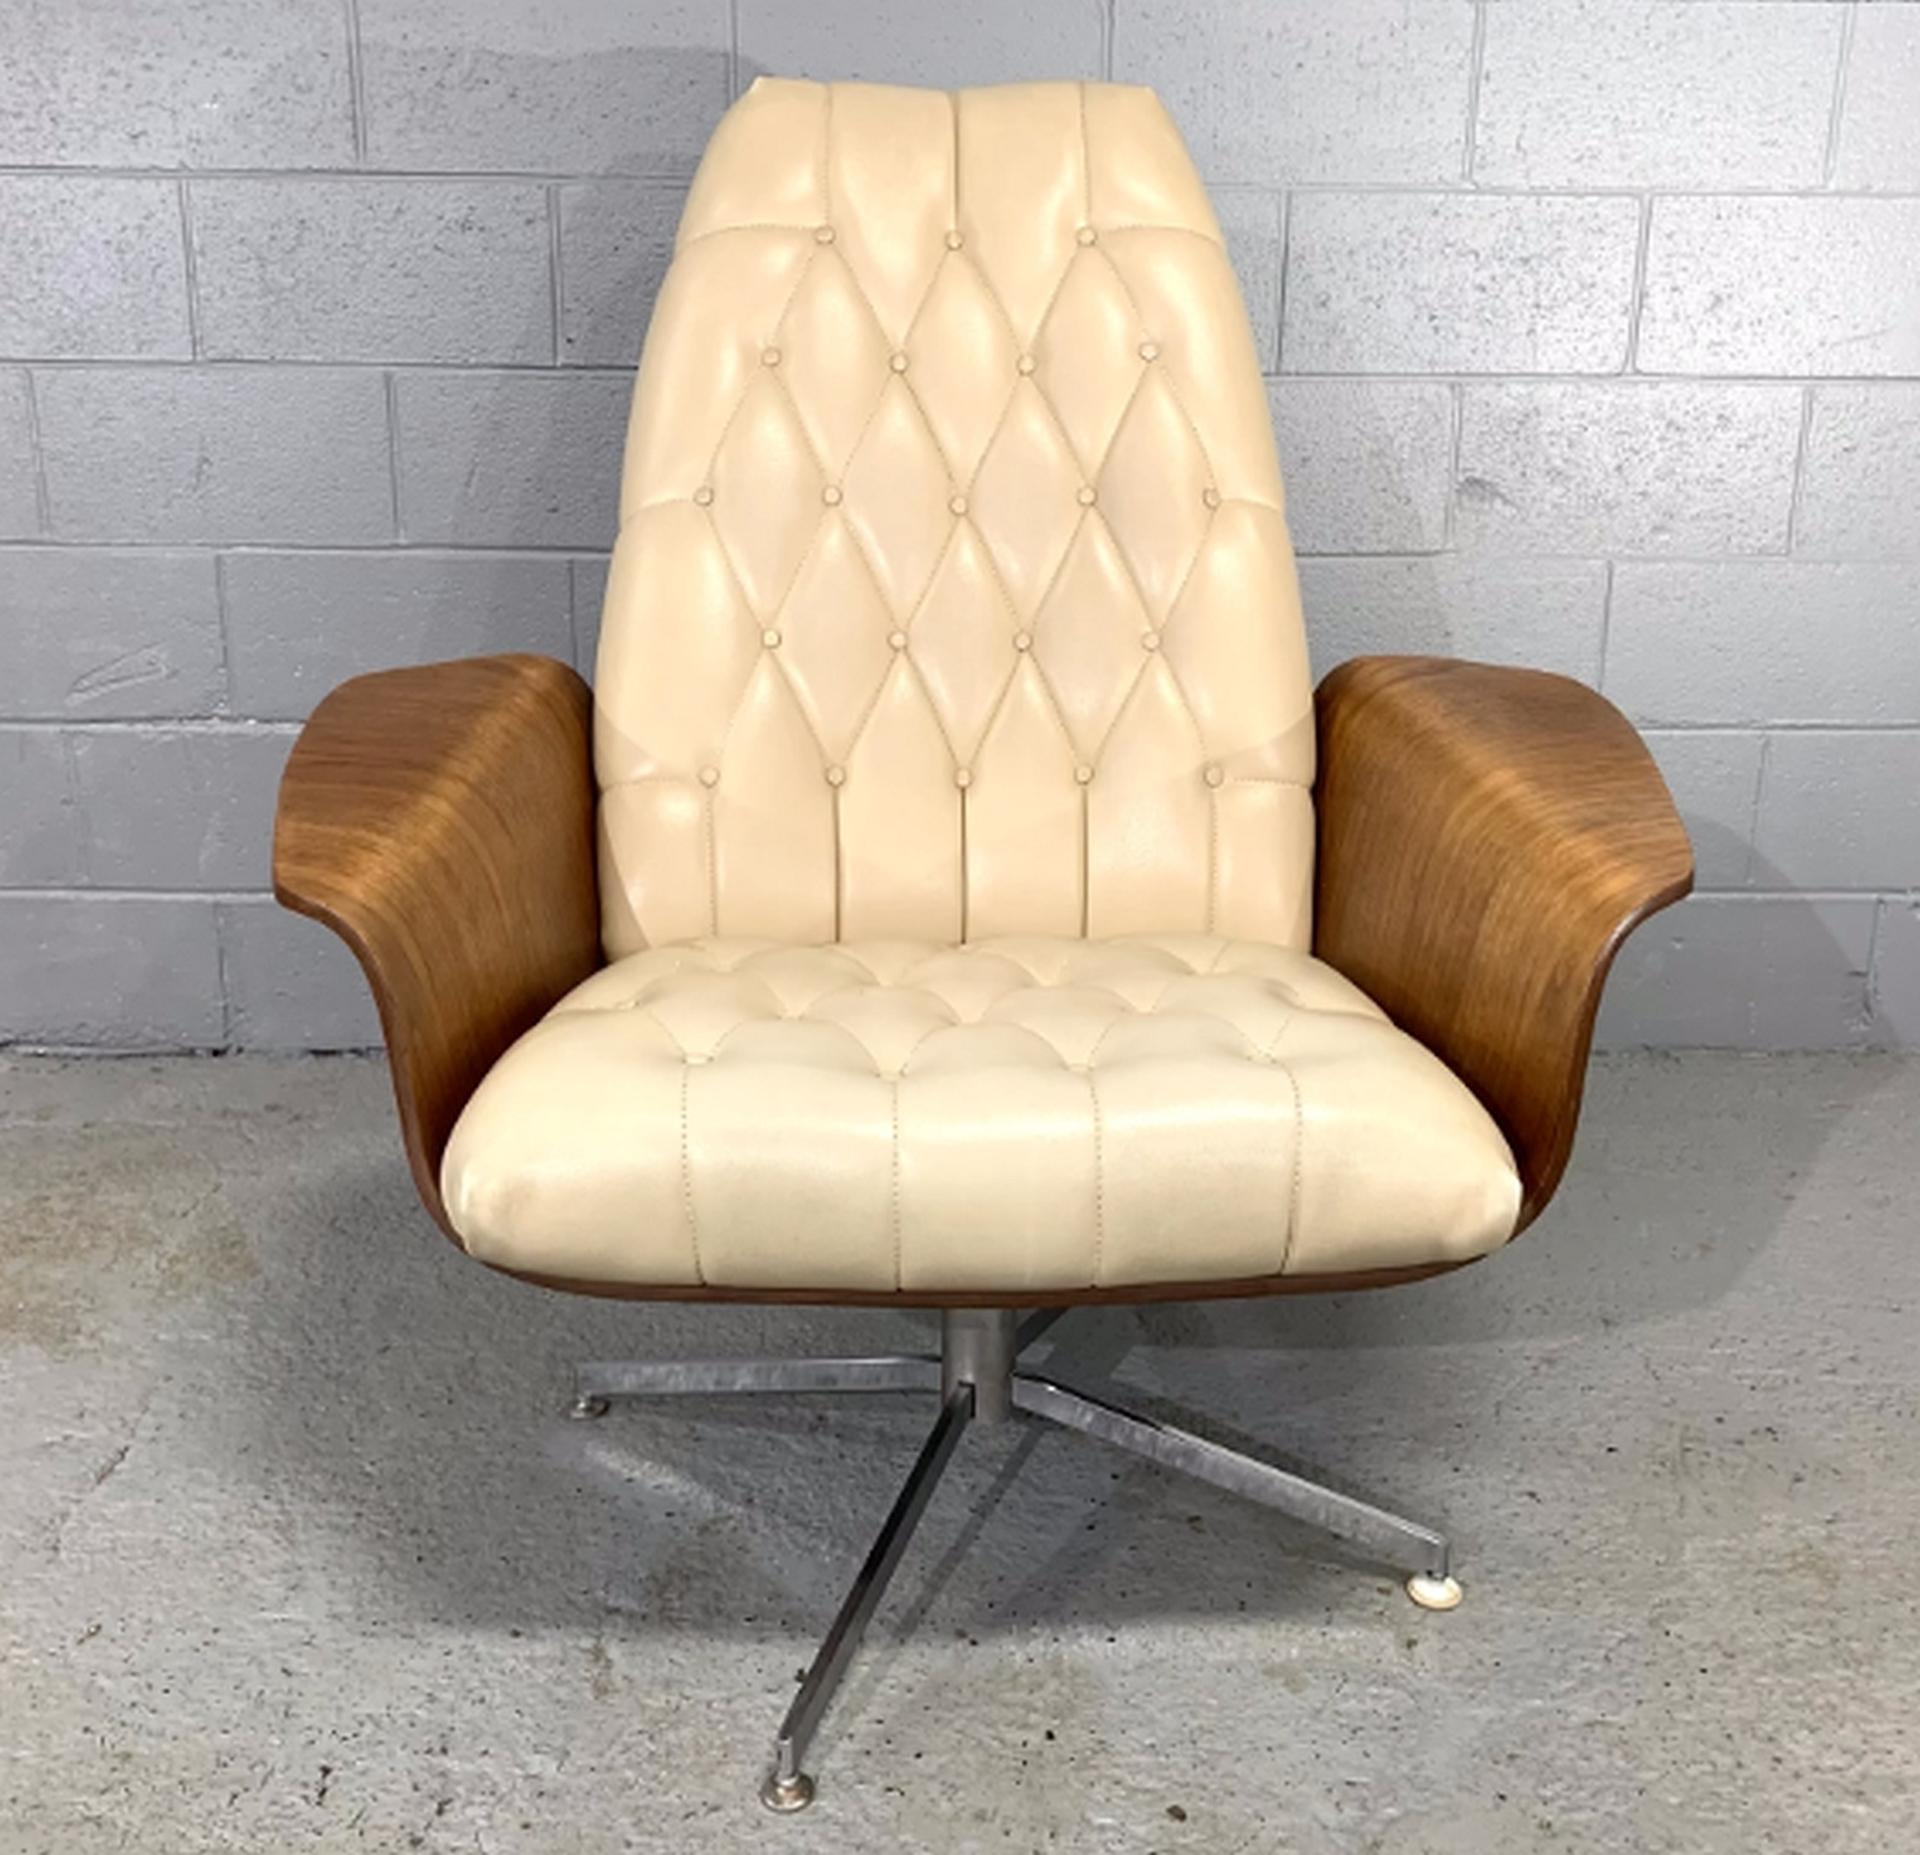 Teak lounge chair with high quality cream leather upholstery and swivel base by George Mulhauser for Plycraft. Called the “Mr. Chair”, this swivel lounge chair features a bentwood teak shell with winged armrests and a metal x-style base. It swivels